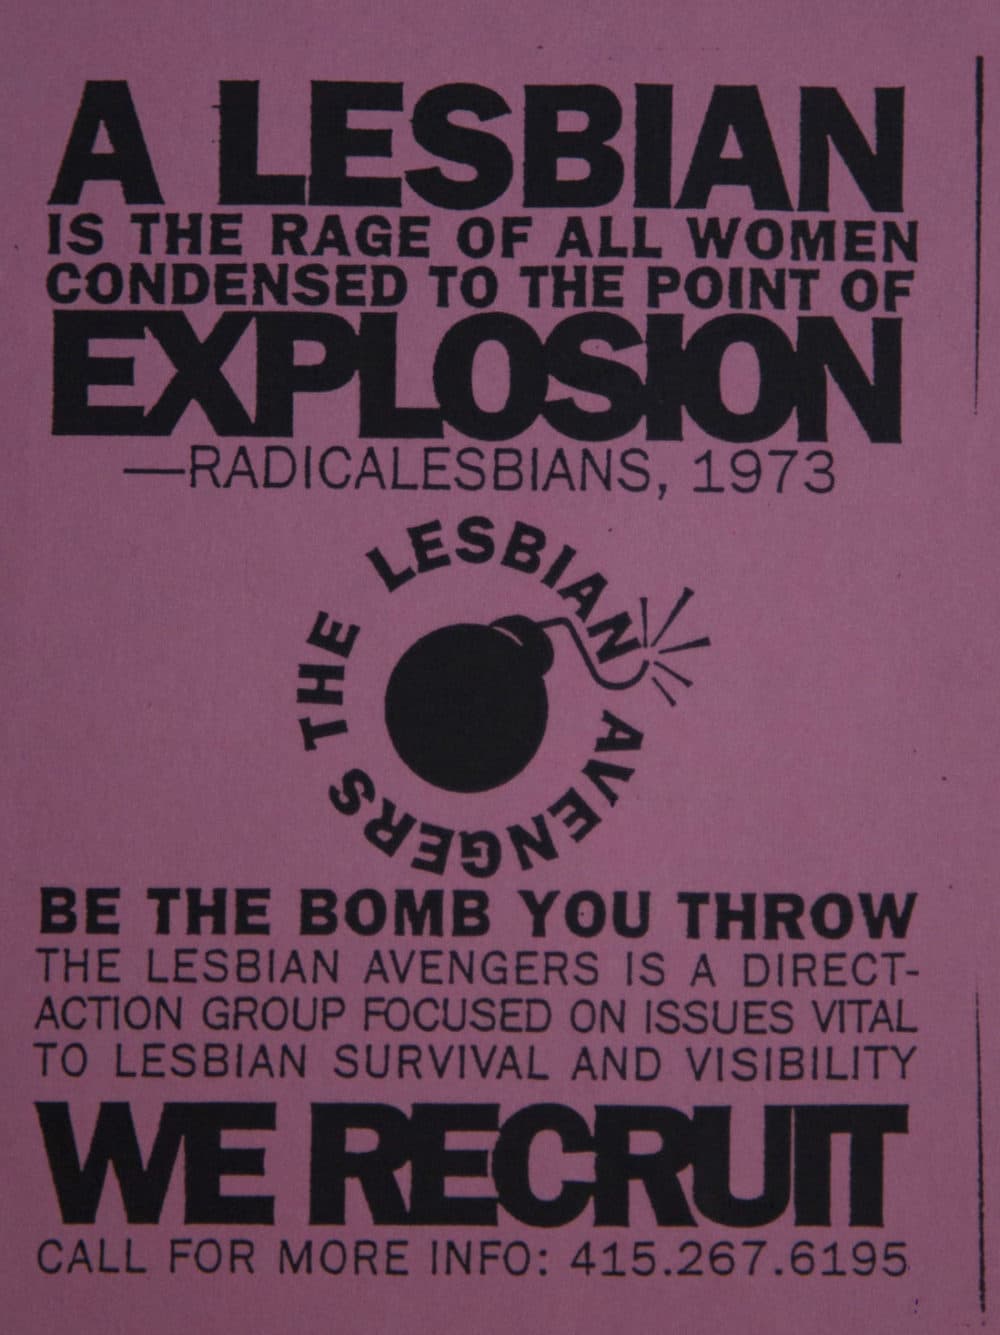 This flyer, featuring a bomb, was used to recruit new members to the Lesbian Avengers. (Courtesy The History Project)